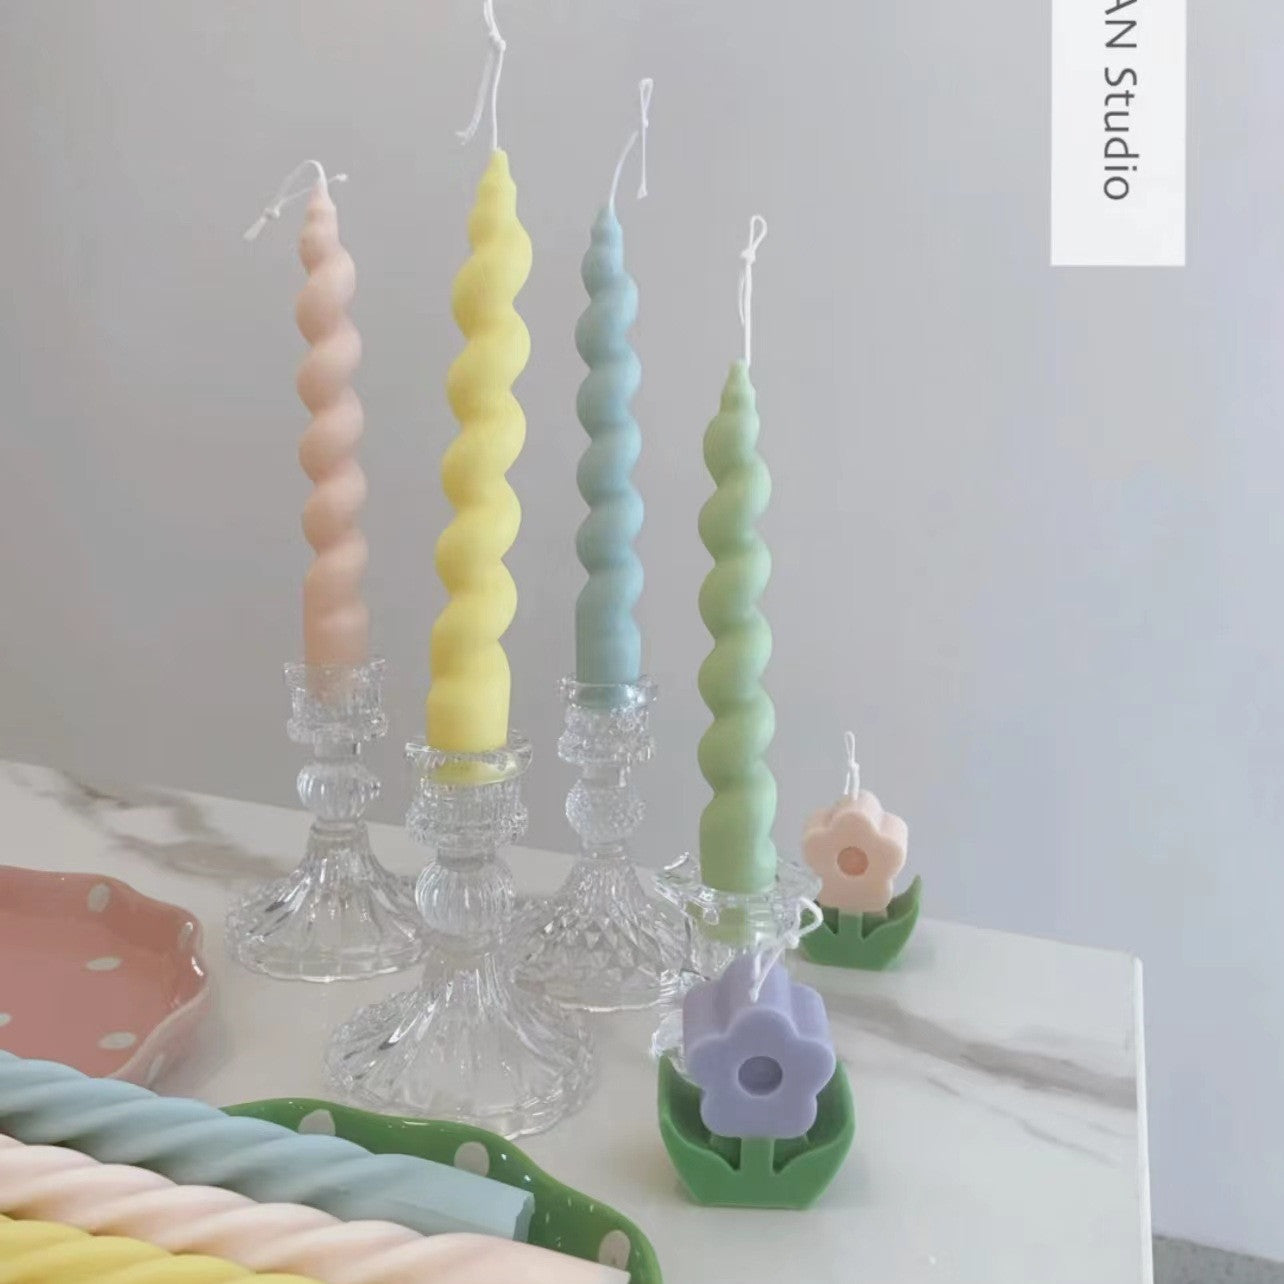 Twist Spiral Rotating Candle Cute, Geometric candle molds, Abstract candle molds, DIY candle making molds, Decognomes, Silicone candle molds, Candle Molds, Aromatherapy Candles, Scented Candle,